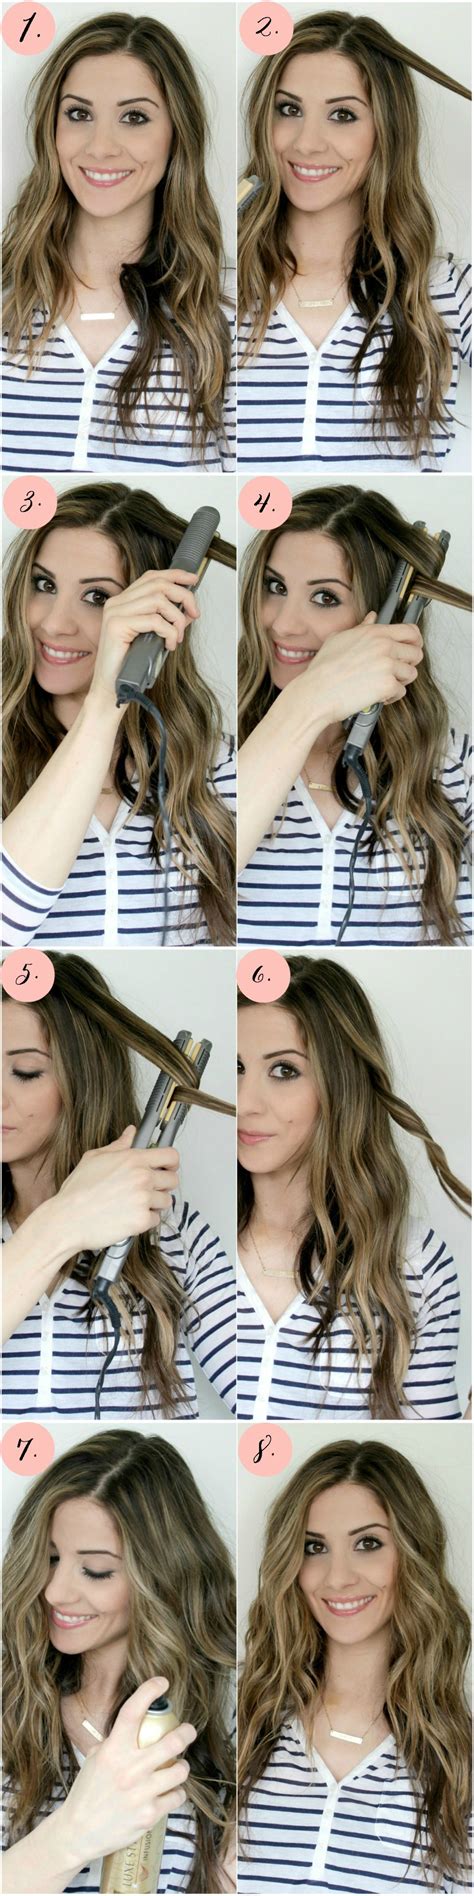 7 Essential Hair Care Tips for Using a Magic Flat Iron